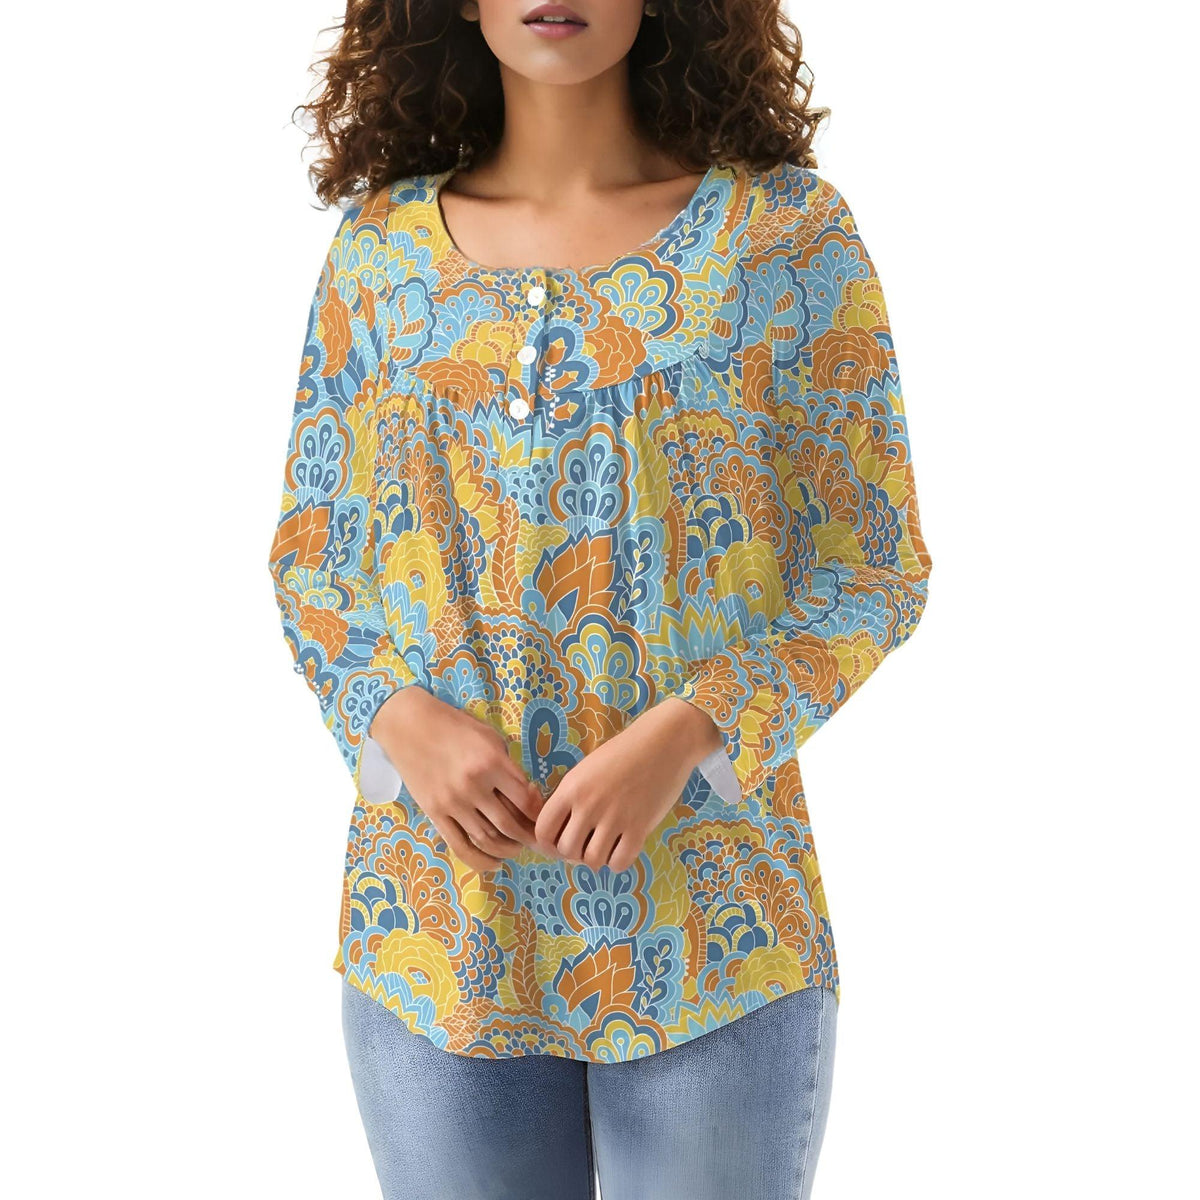 Pinsa Babydoll Long Sleeve Crew Neck Top - Floral Paisley Retro Flower Power Funky Psychedelic Crew Neck